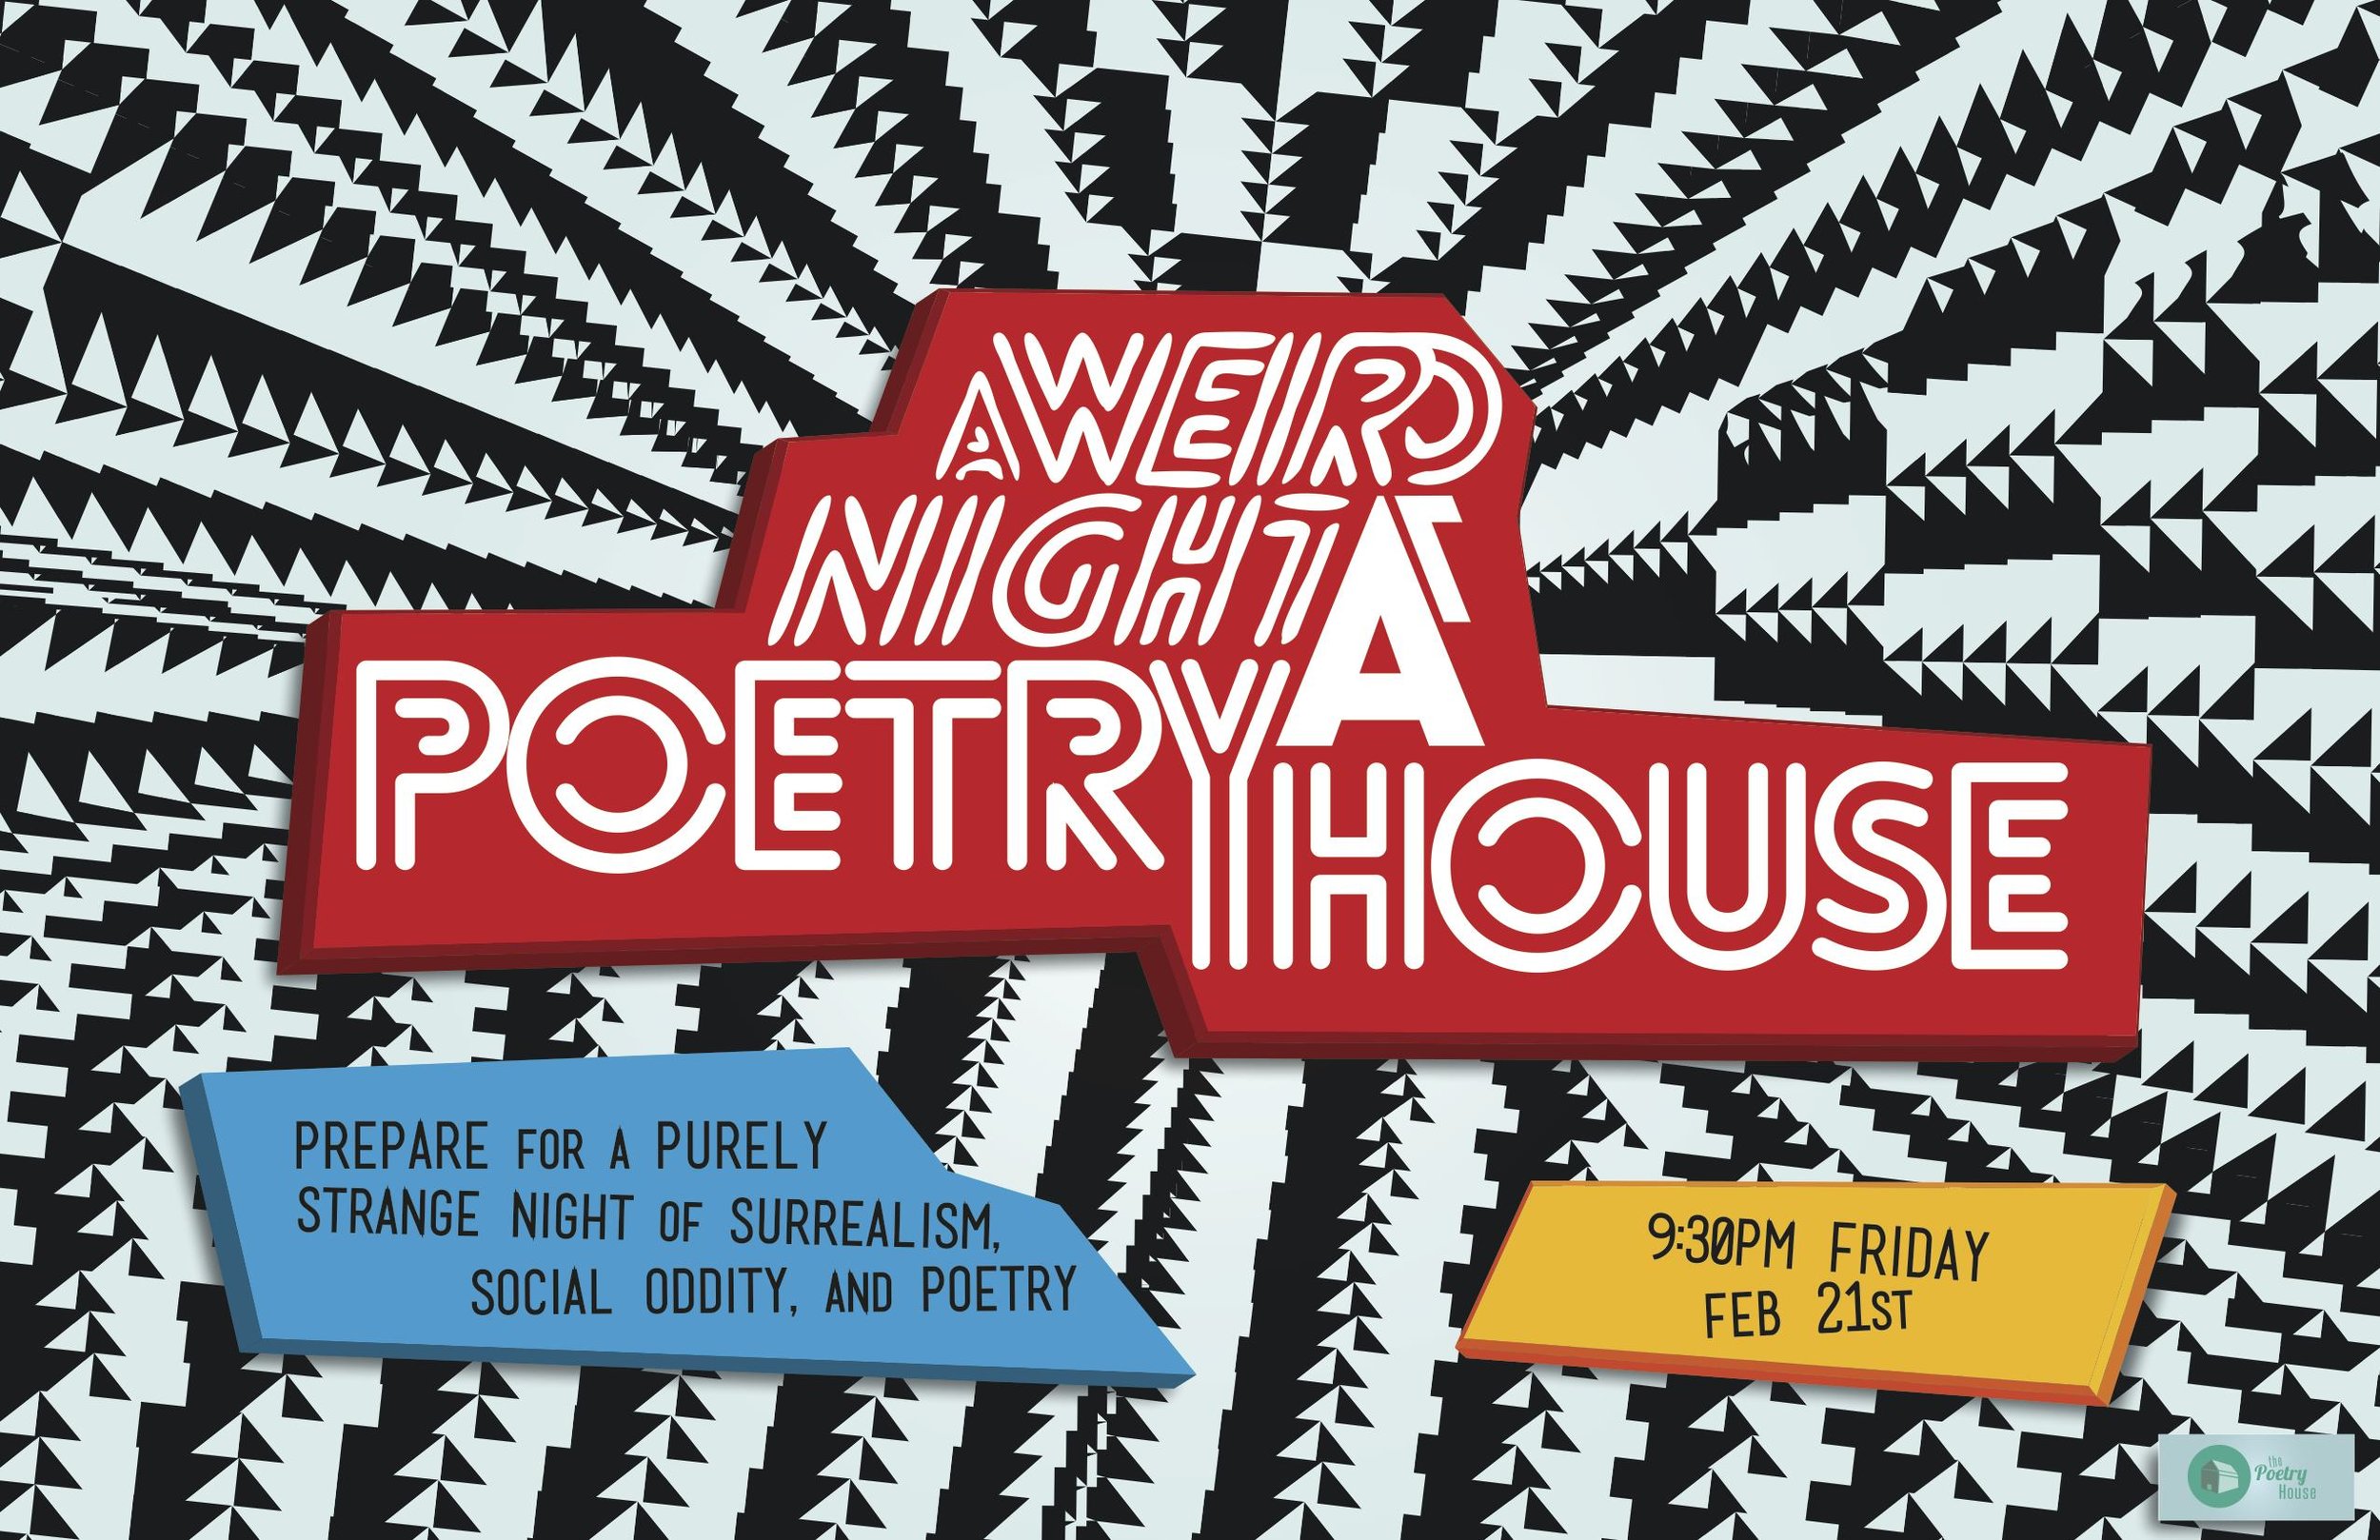 'A Weird Night at Poetry House' Event Poster